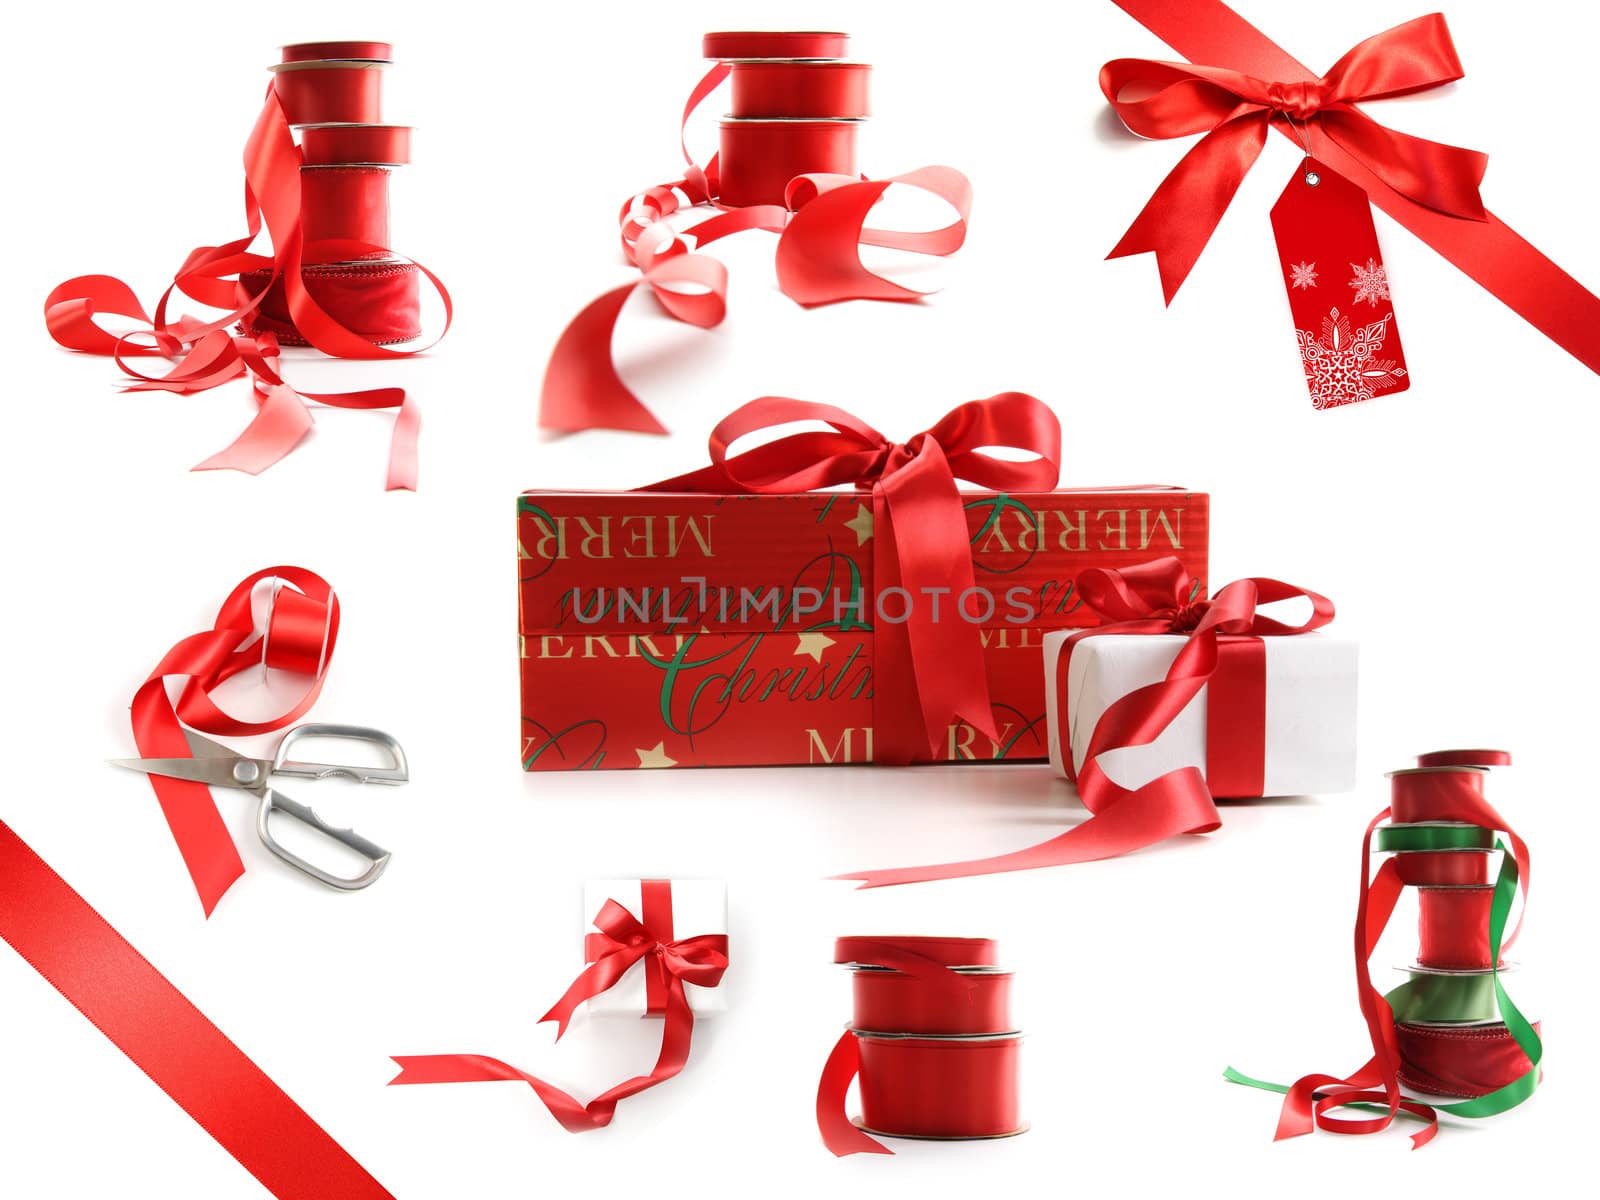 Different sizes of red ribbons and gift wrapped boxes isolated on white background